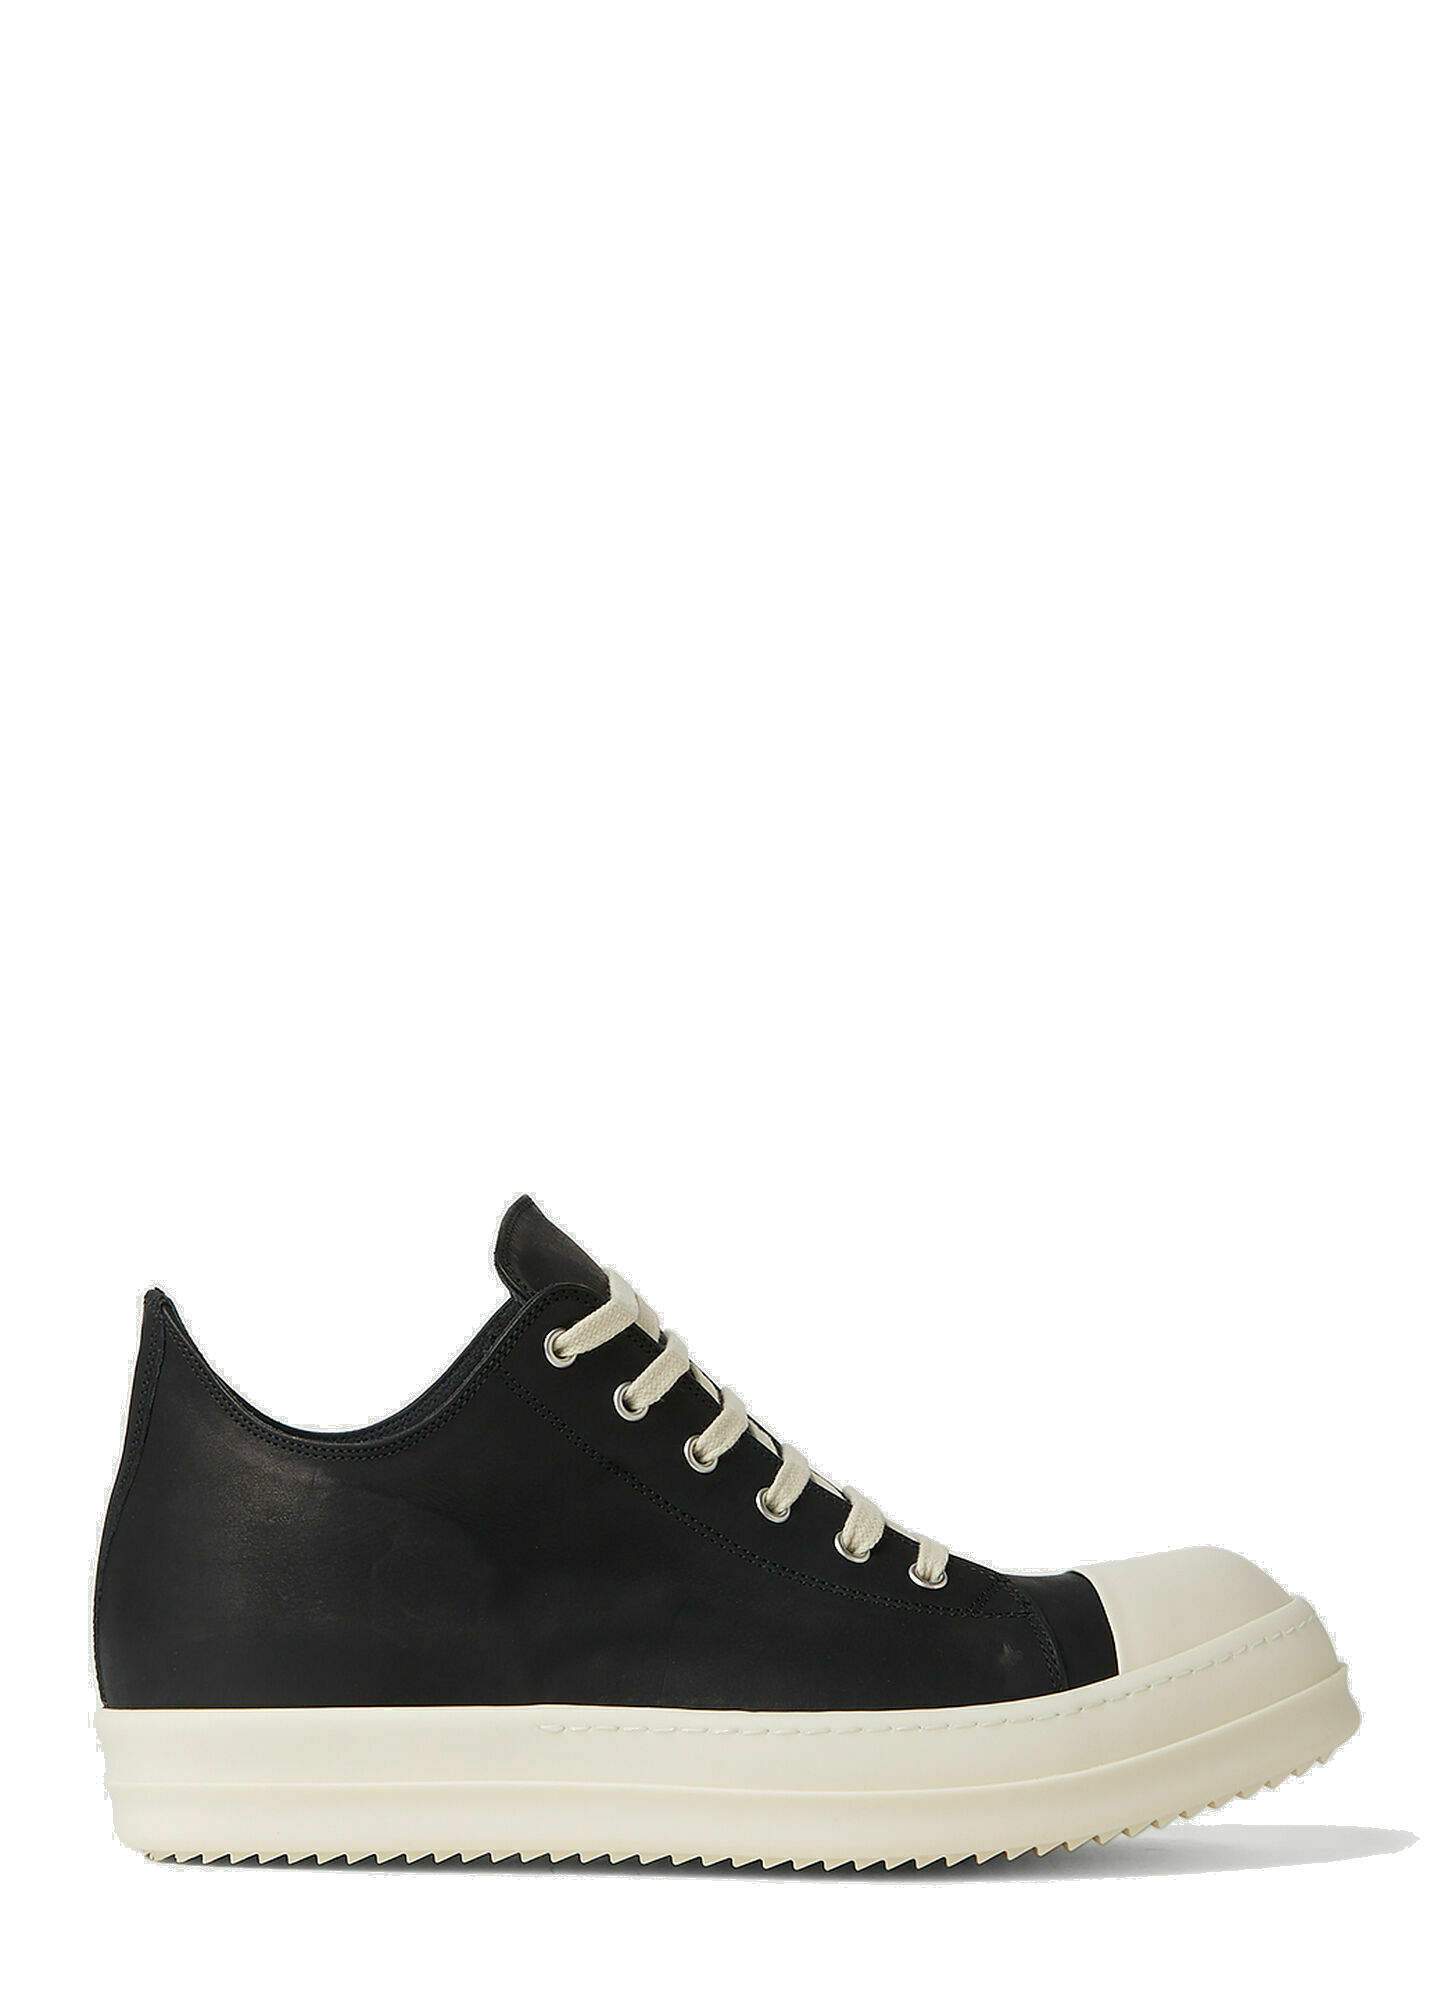 Photo: Rick Owens - Lace Up Sneakers in Black